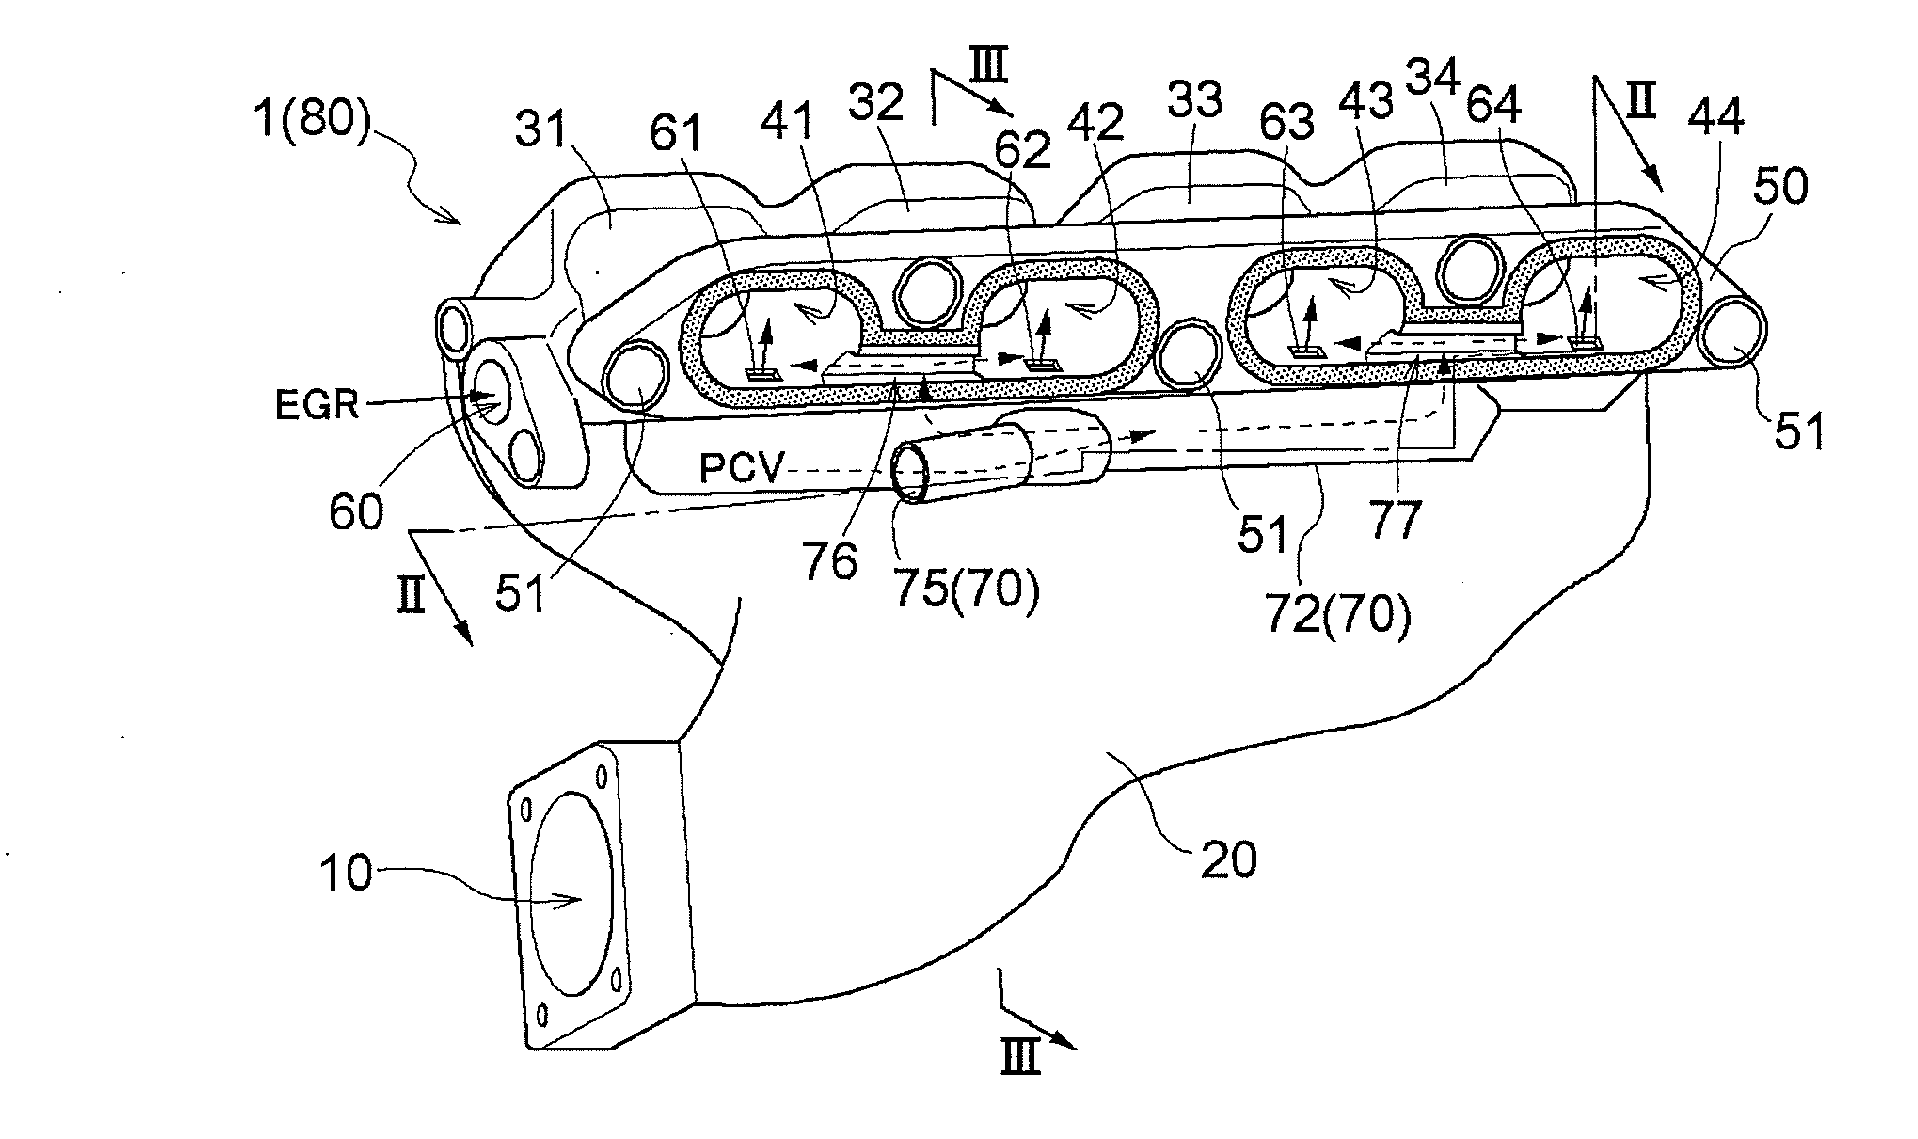 Freeze prevention arrangement for pcv channel and intake manifold